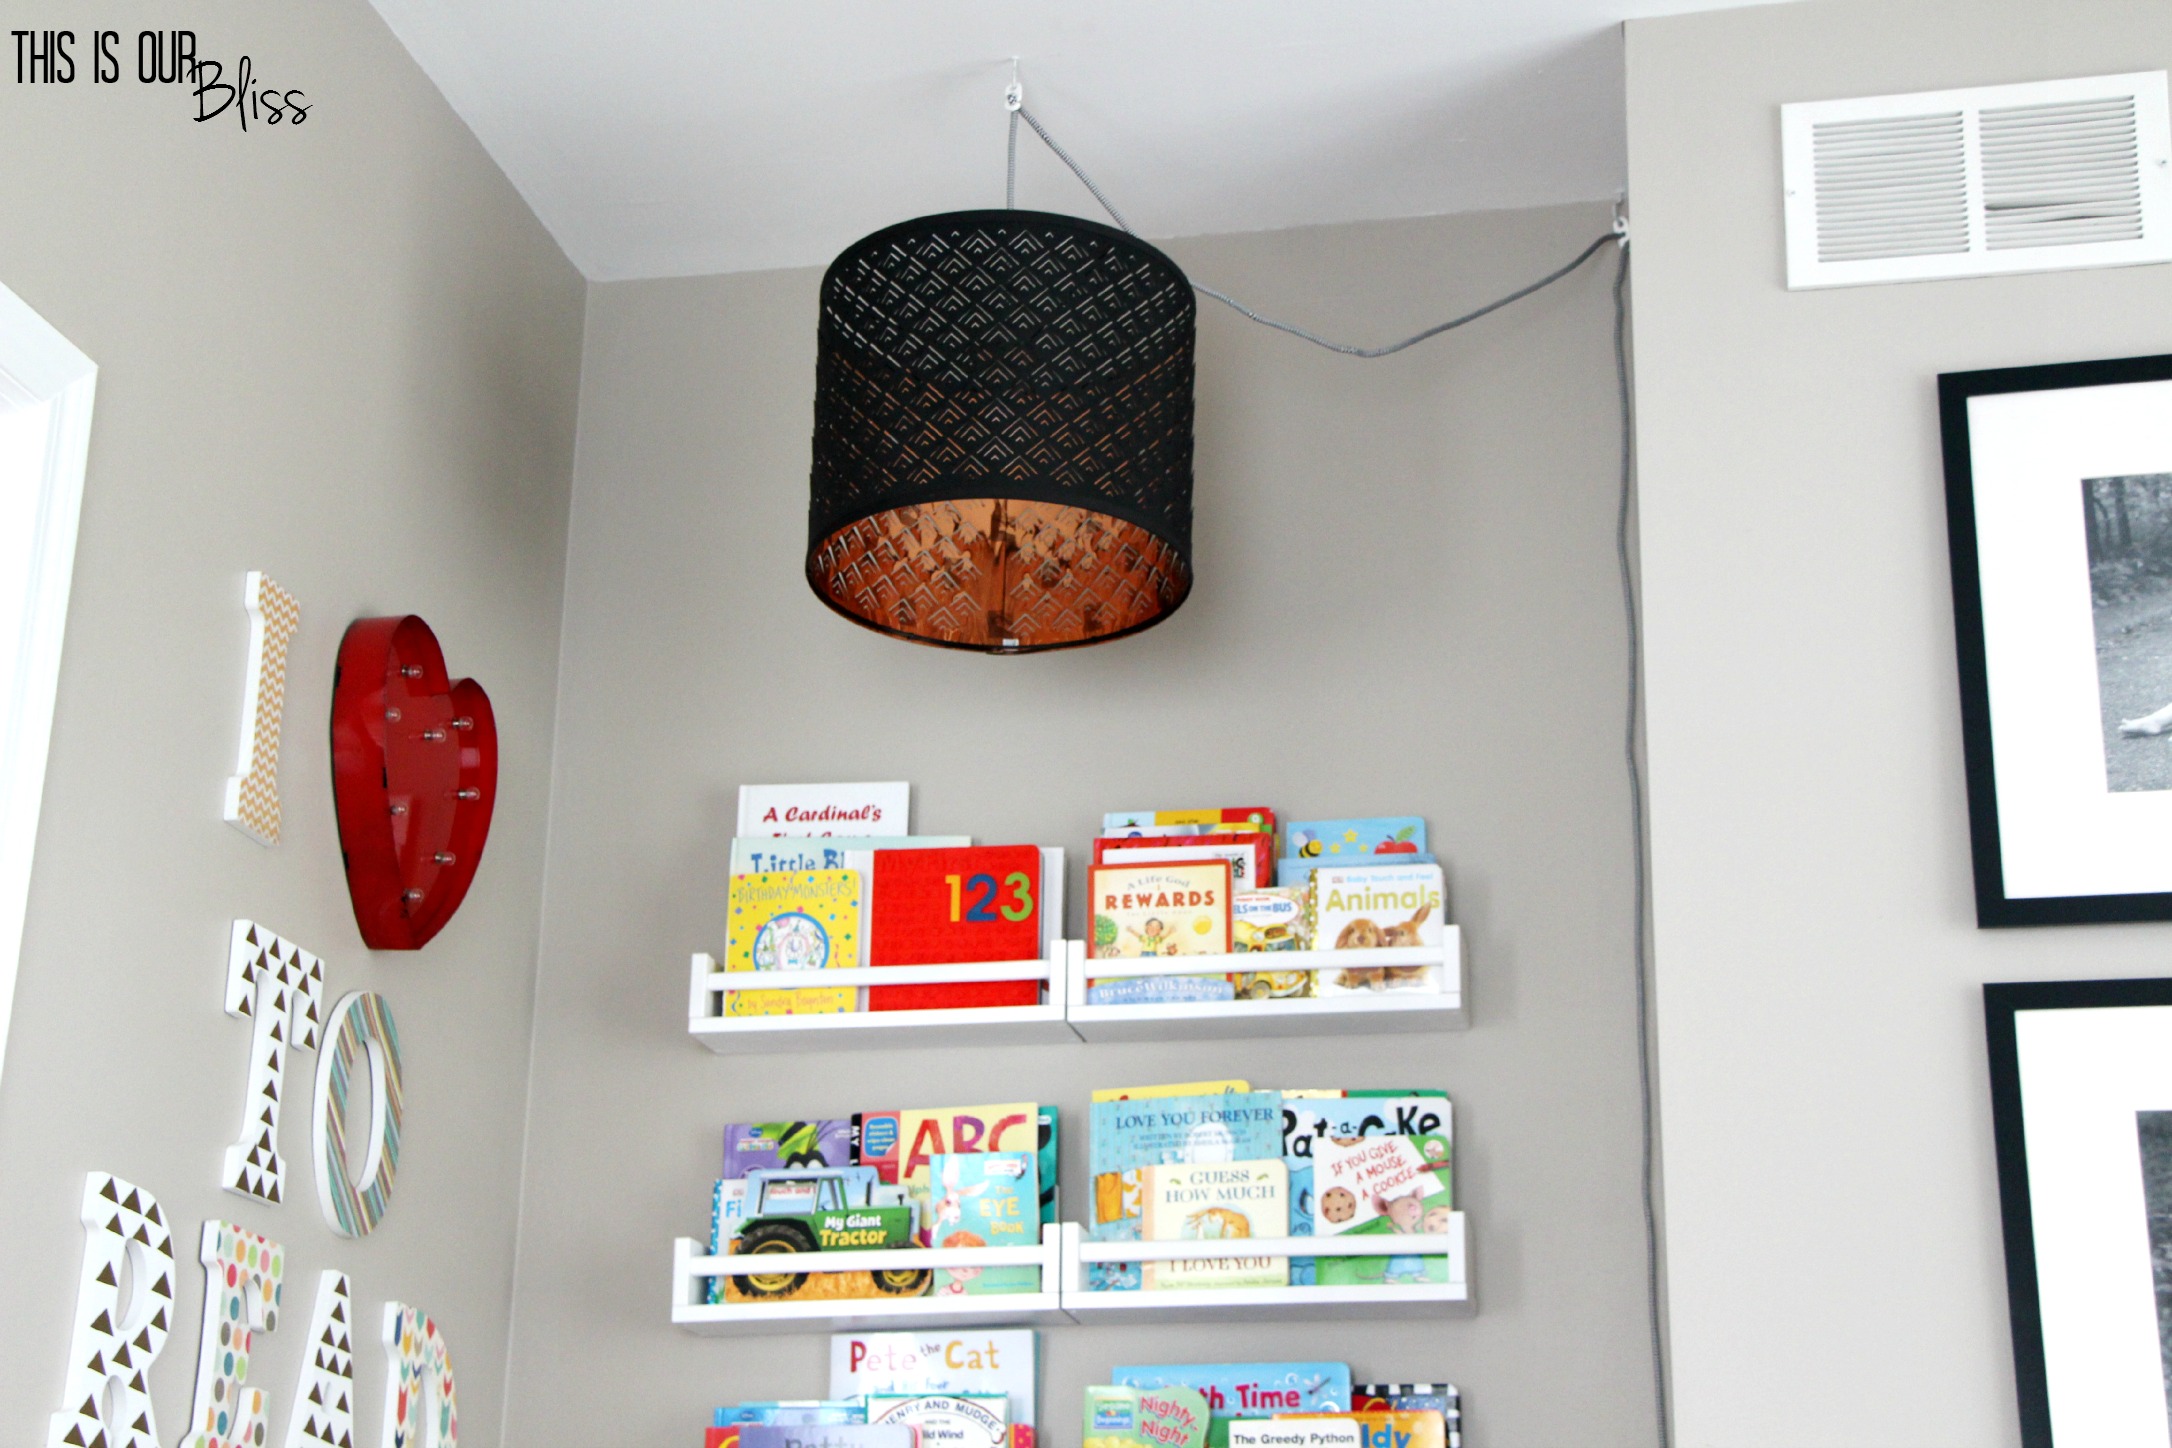 playroom reading nook - DIY reading nook light - reading corner - kids room - This is our Bliss